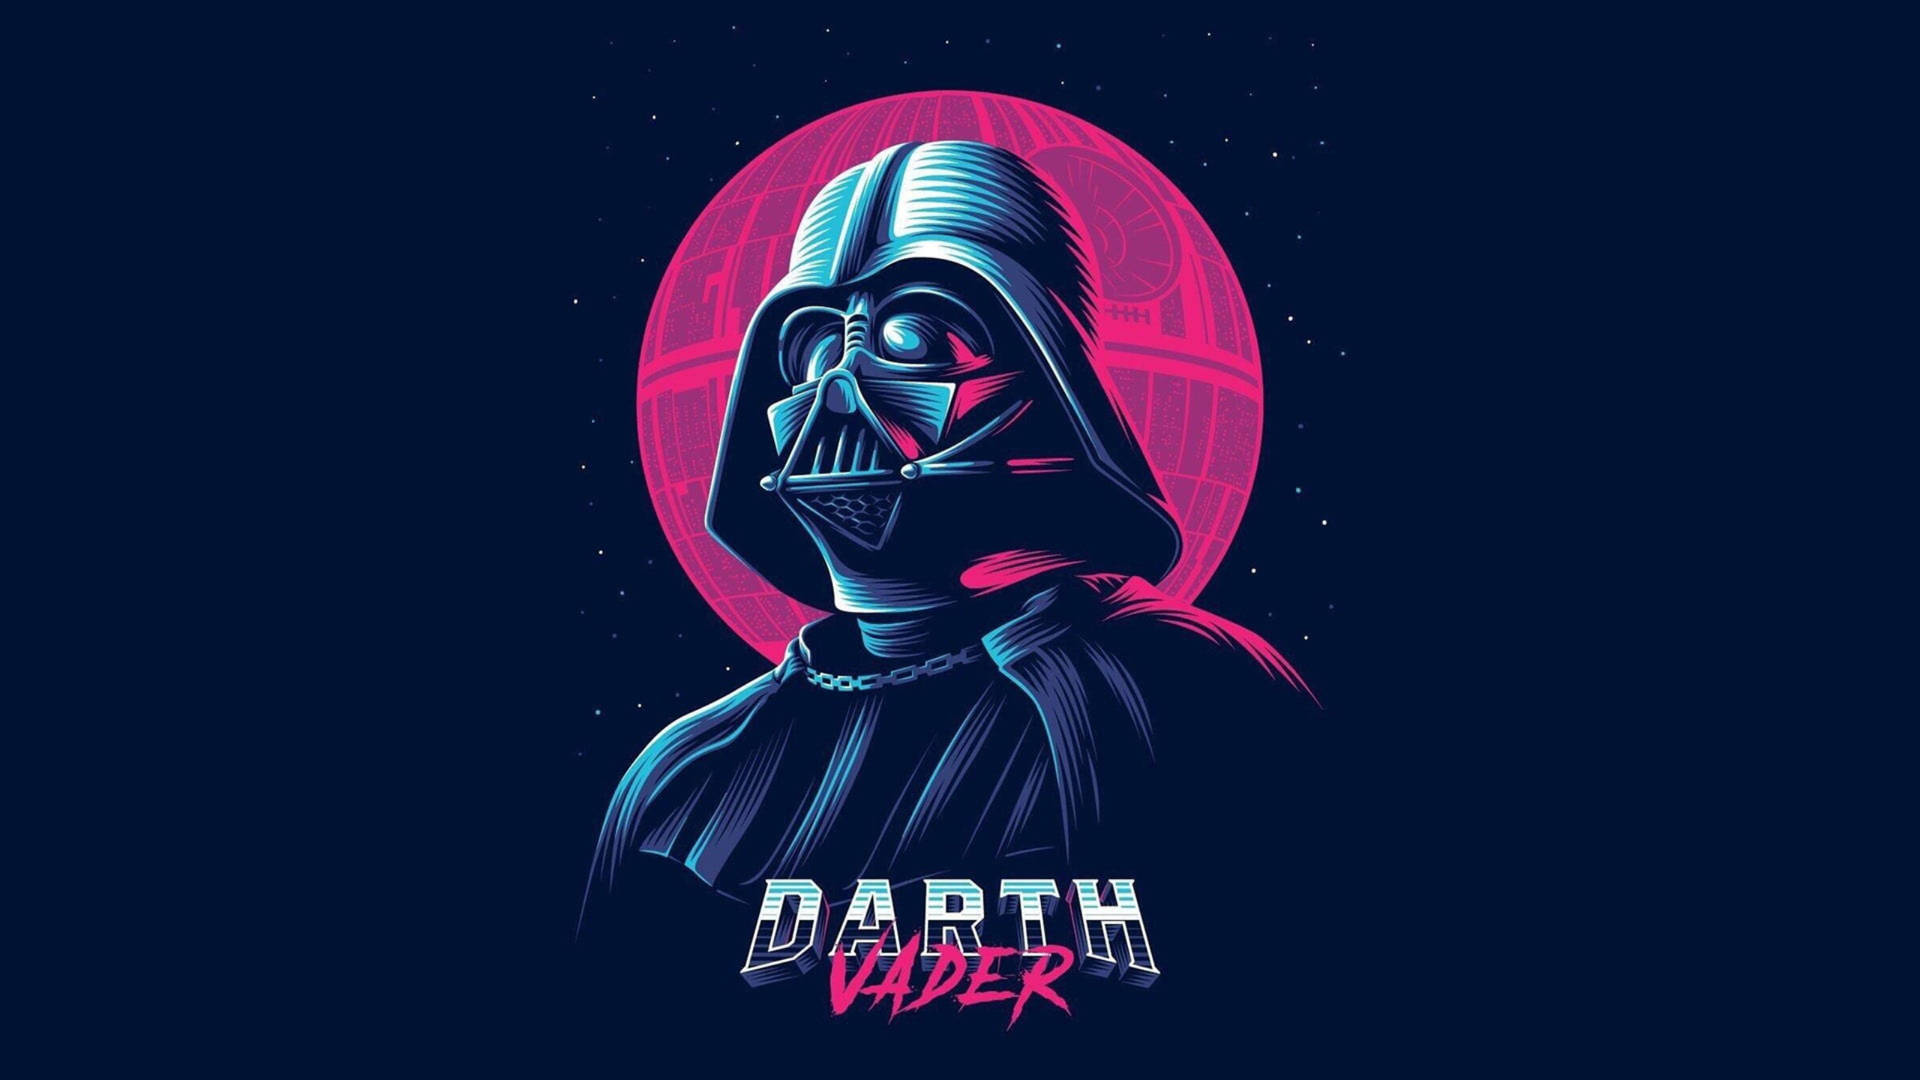 Darth Vader In Neon Aesthetic